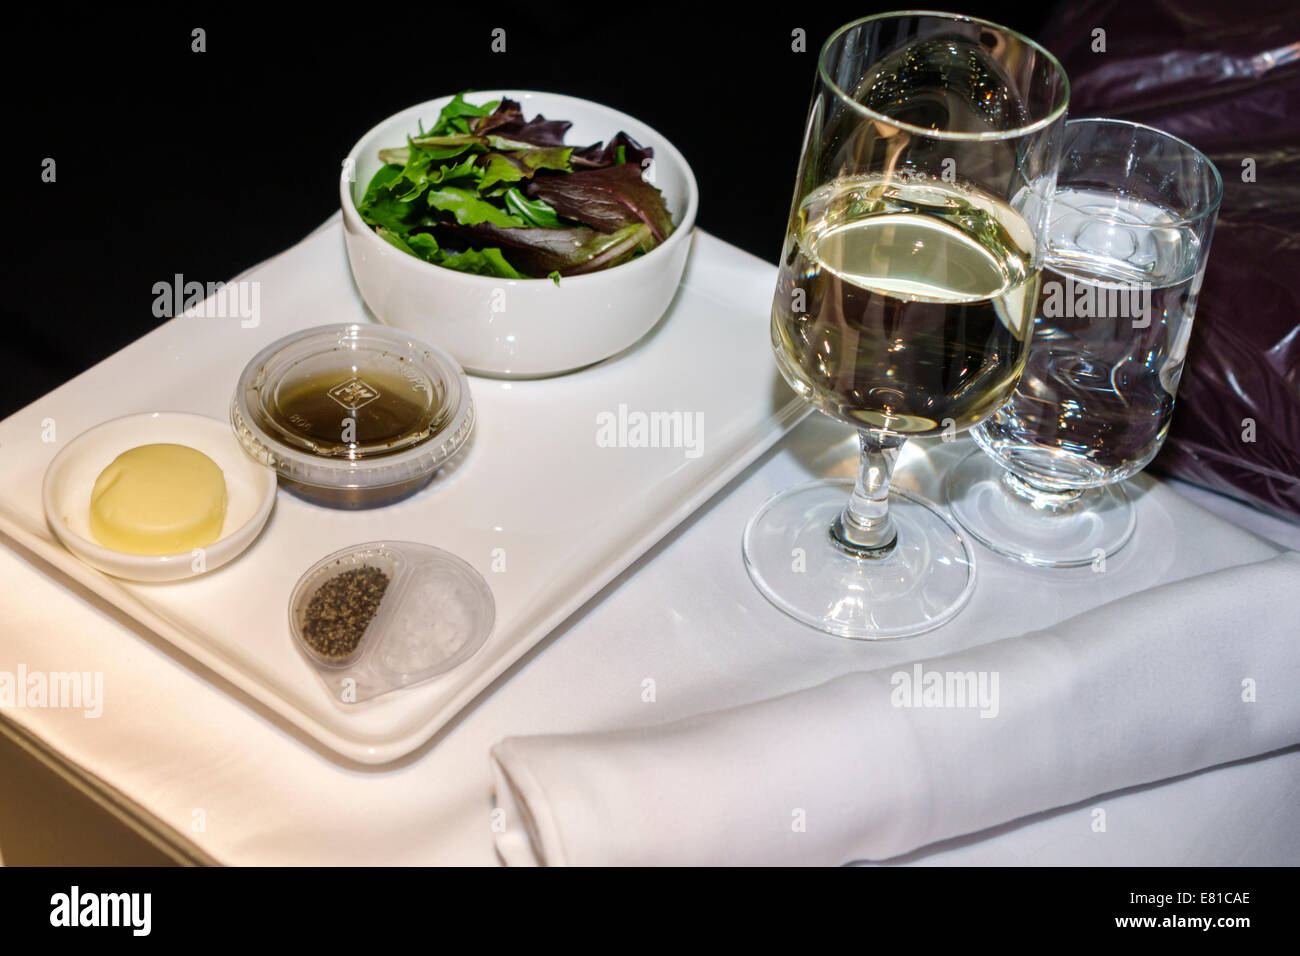 New York,New York,John F. Kennedy International Airport,JFK,onboard,American Airlines,class,tray,salad,glass,wine,water,service,NY140305052 Stock Photo